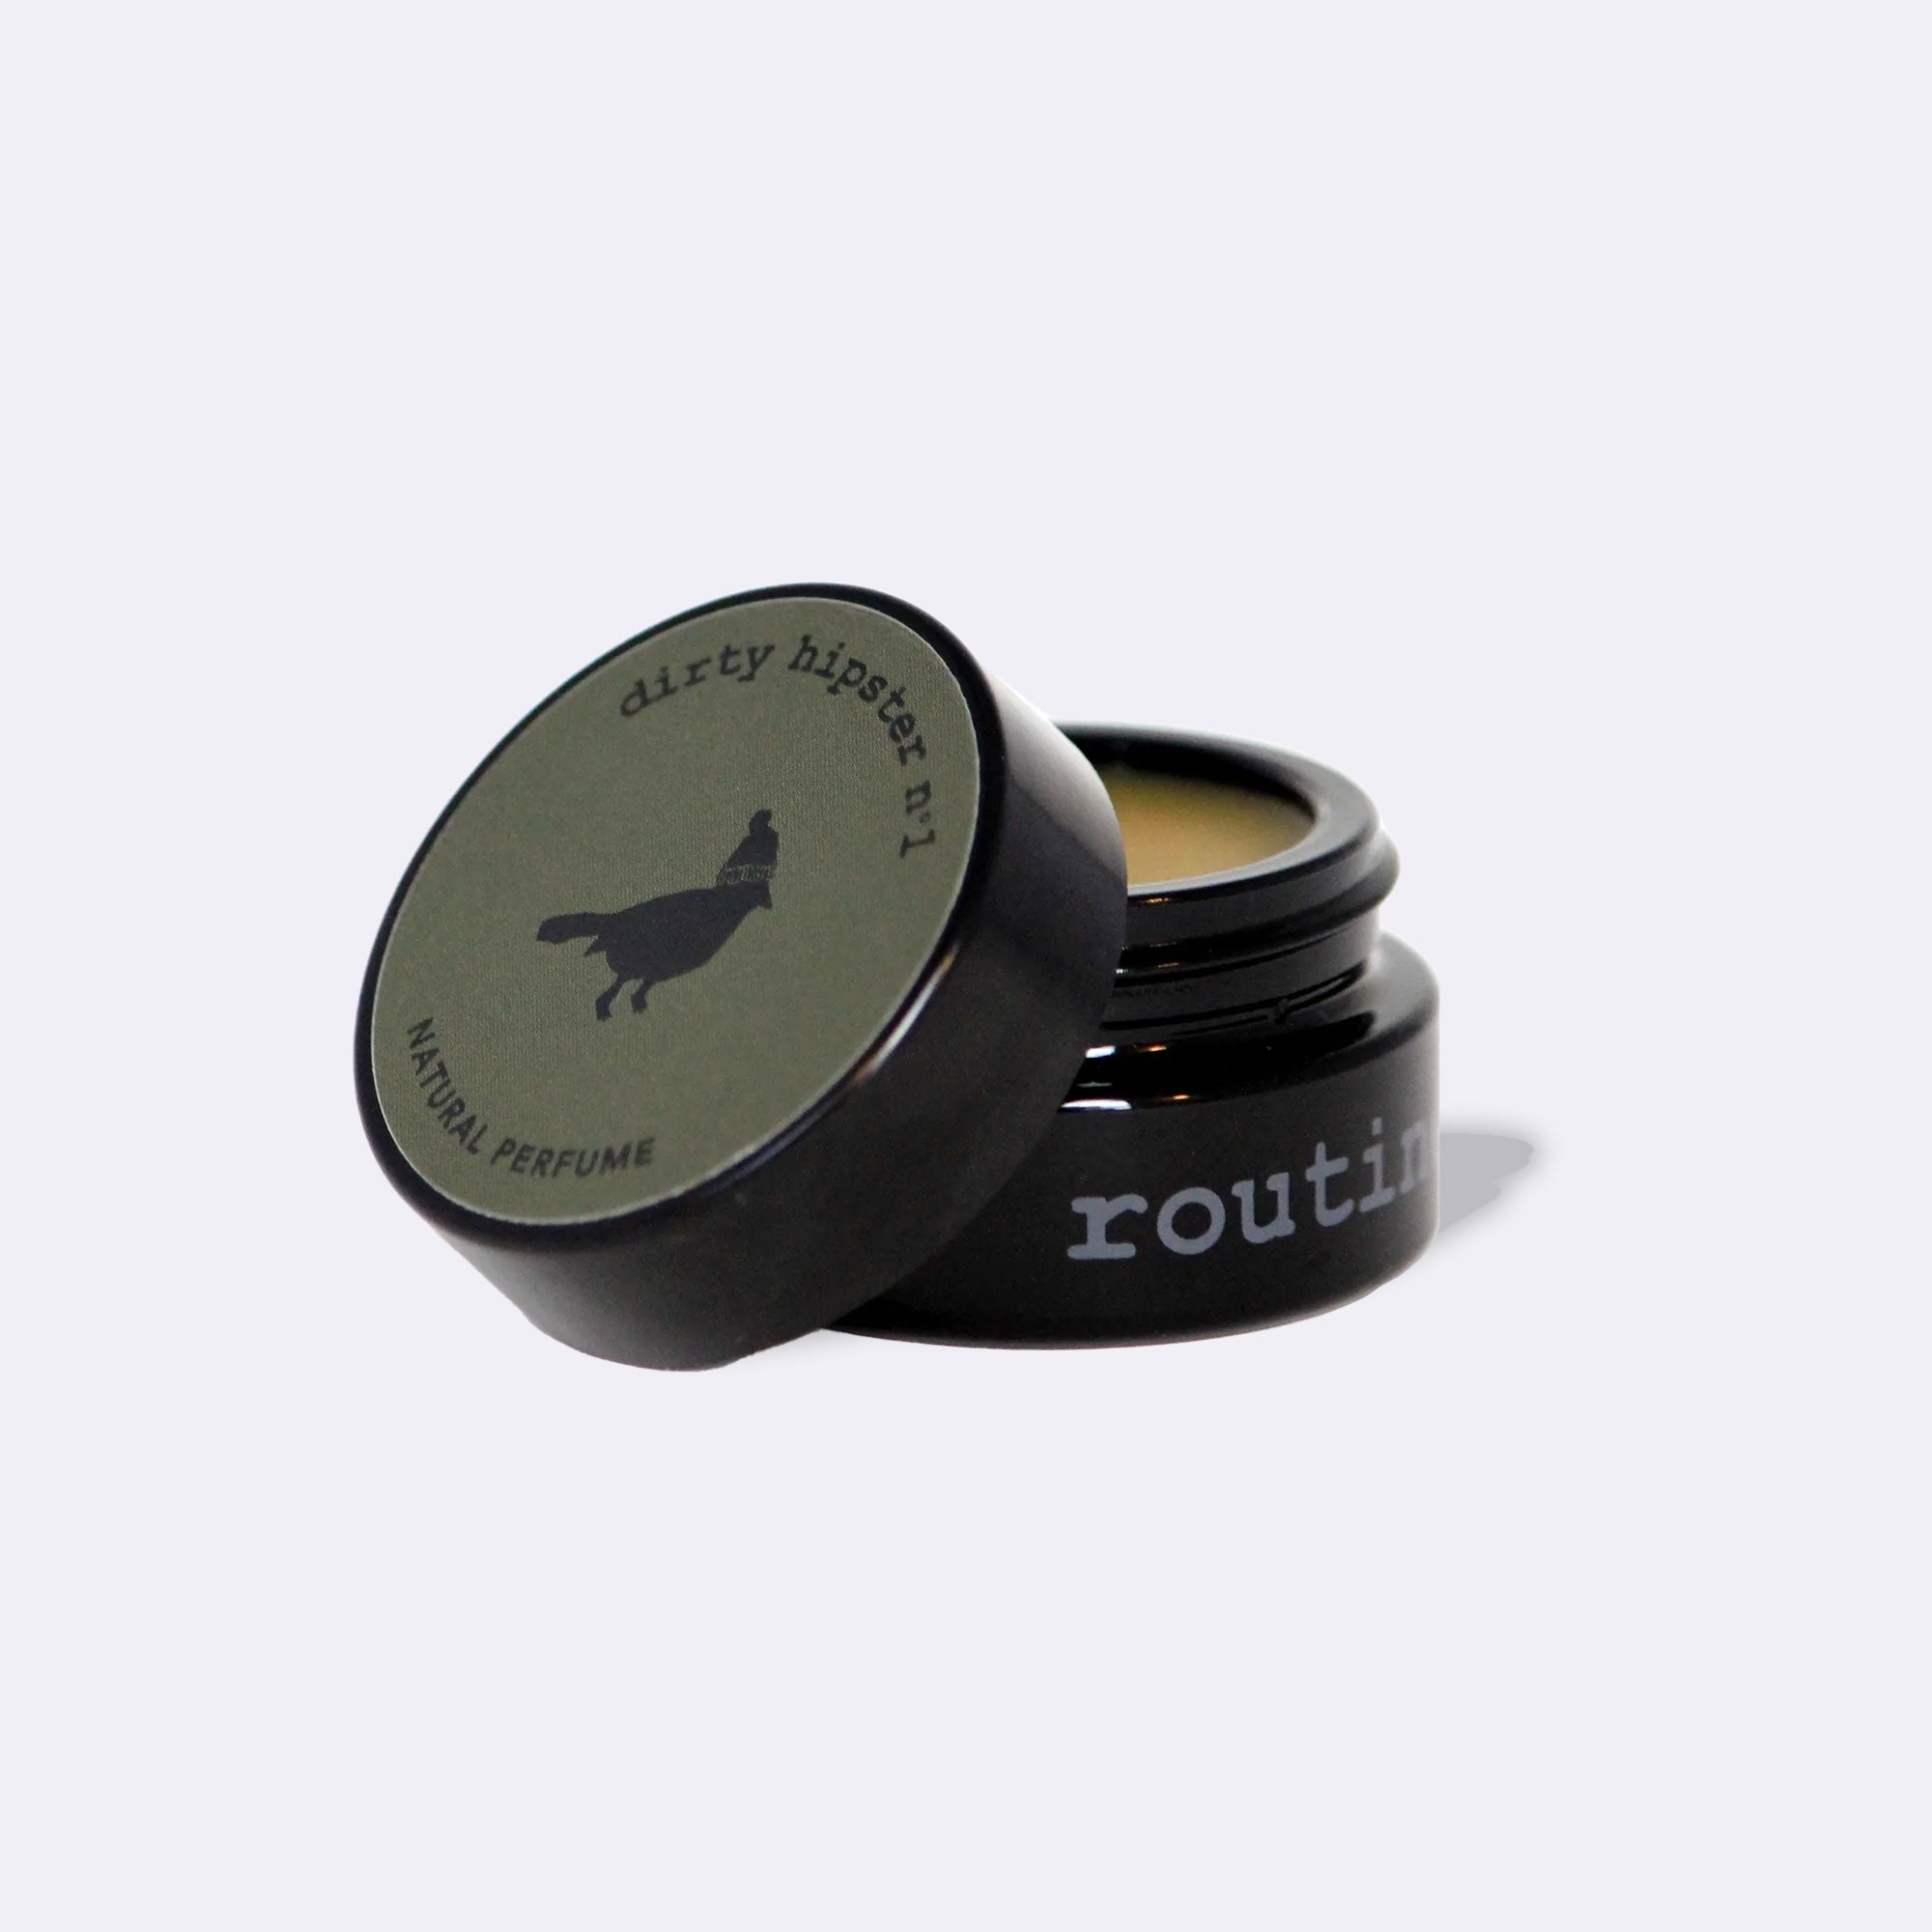 Routine Solid Perfume - Dirty Hipster